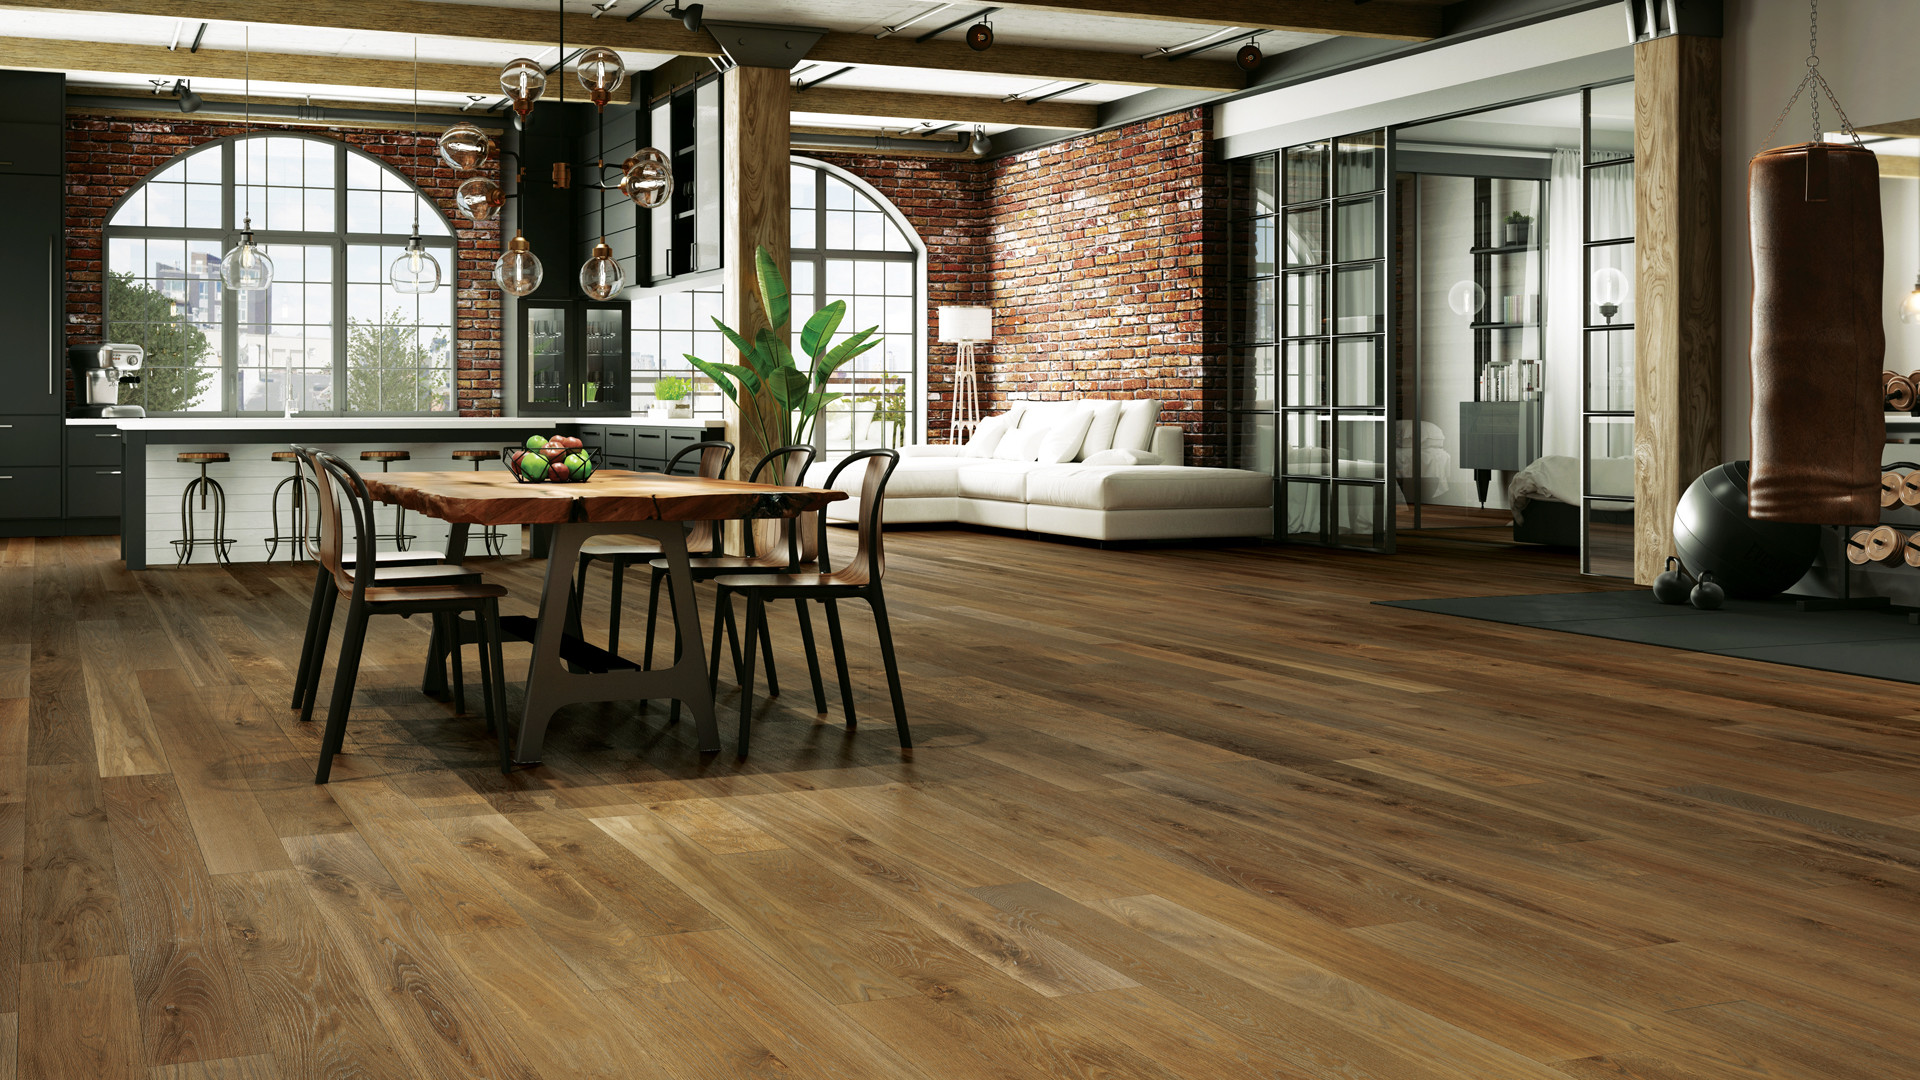 22 Amazing Hardwood Flooring On Concrete Floor 2024 free download hardwood flooring on concrete floor of 4 latest hardwood flooring trends of 2018 lauzon flooring intended for combined with a wire brushed texture and an ultra matte sheen these new 7ac2bd w